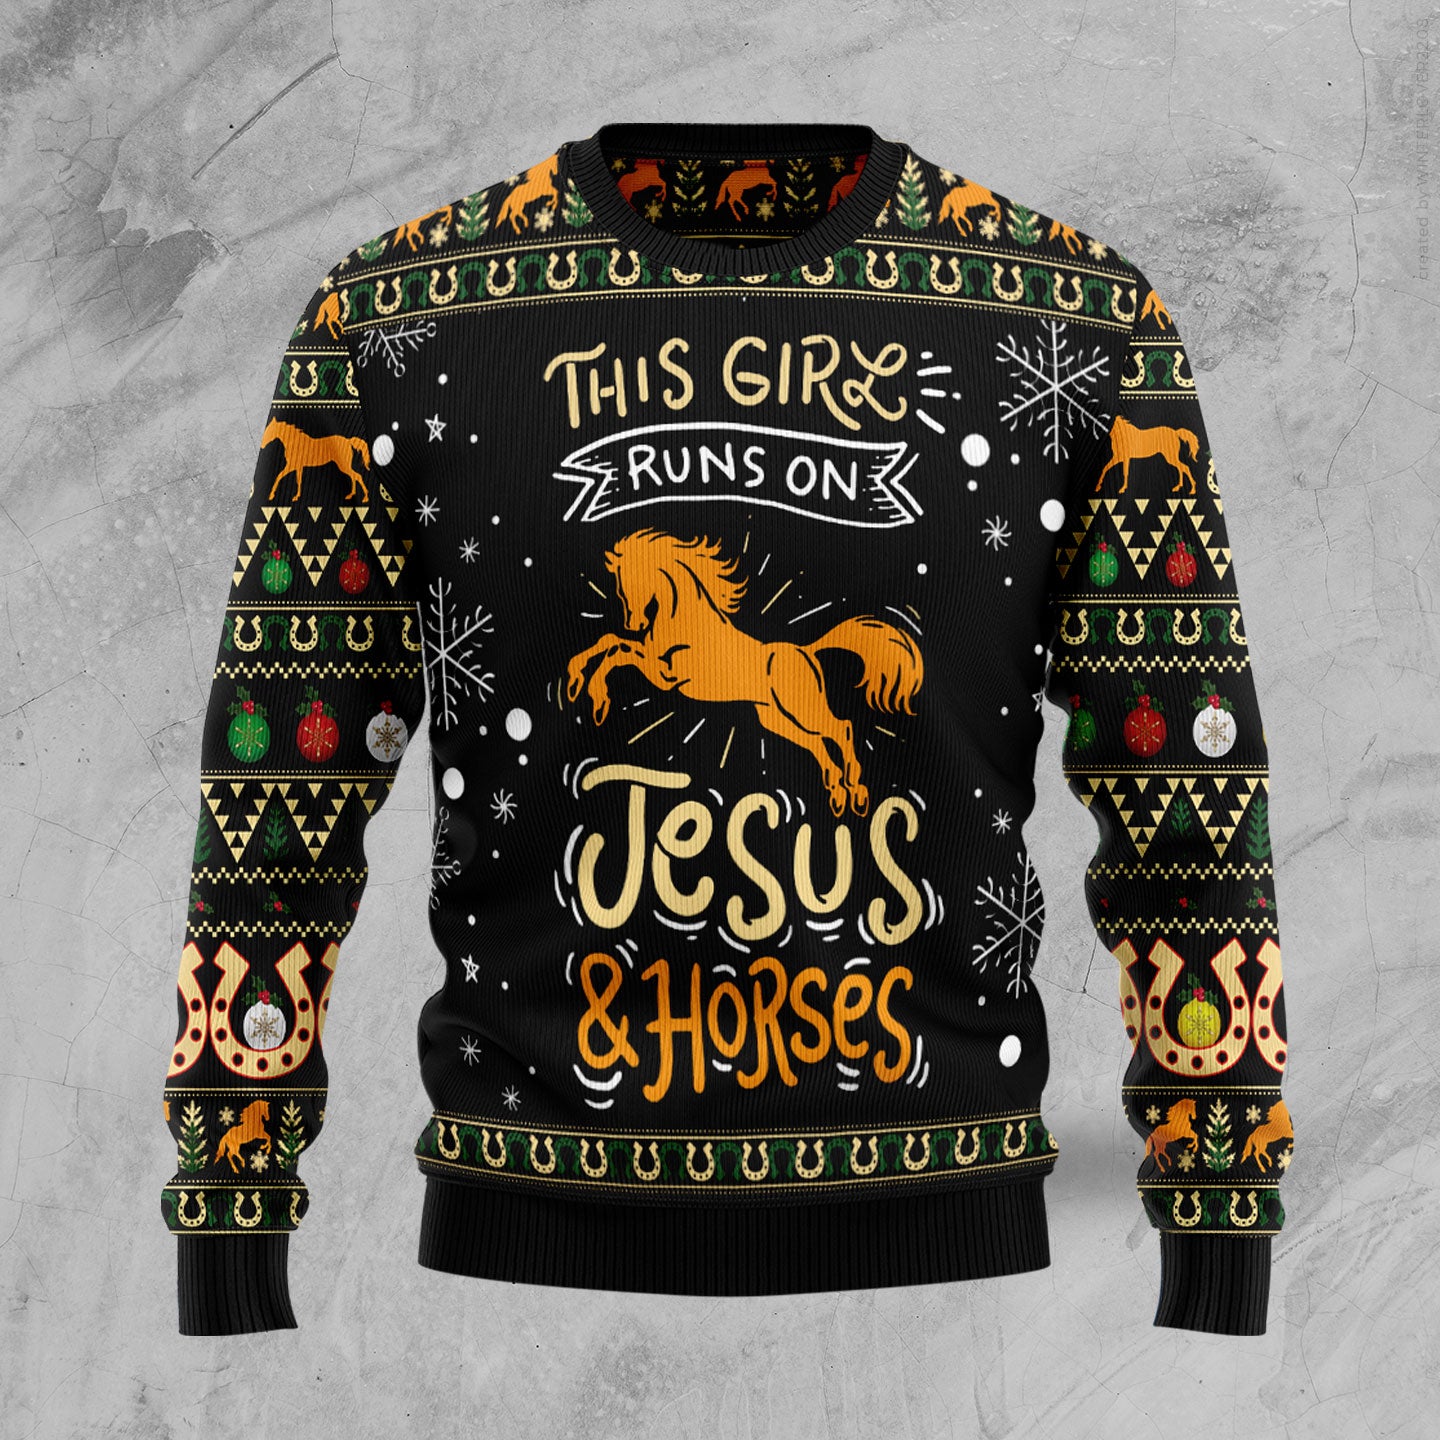 Girls run on jesus and horses HZ102607 Ugly Christmas Sweater